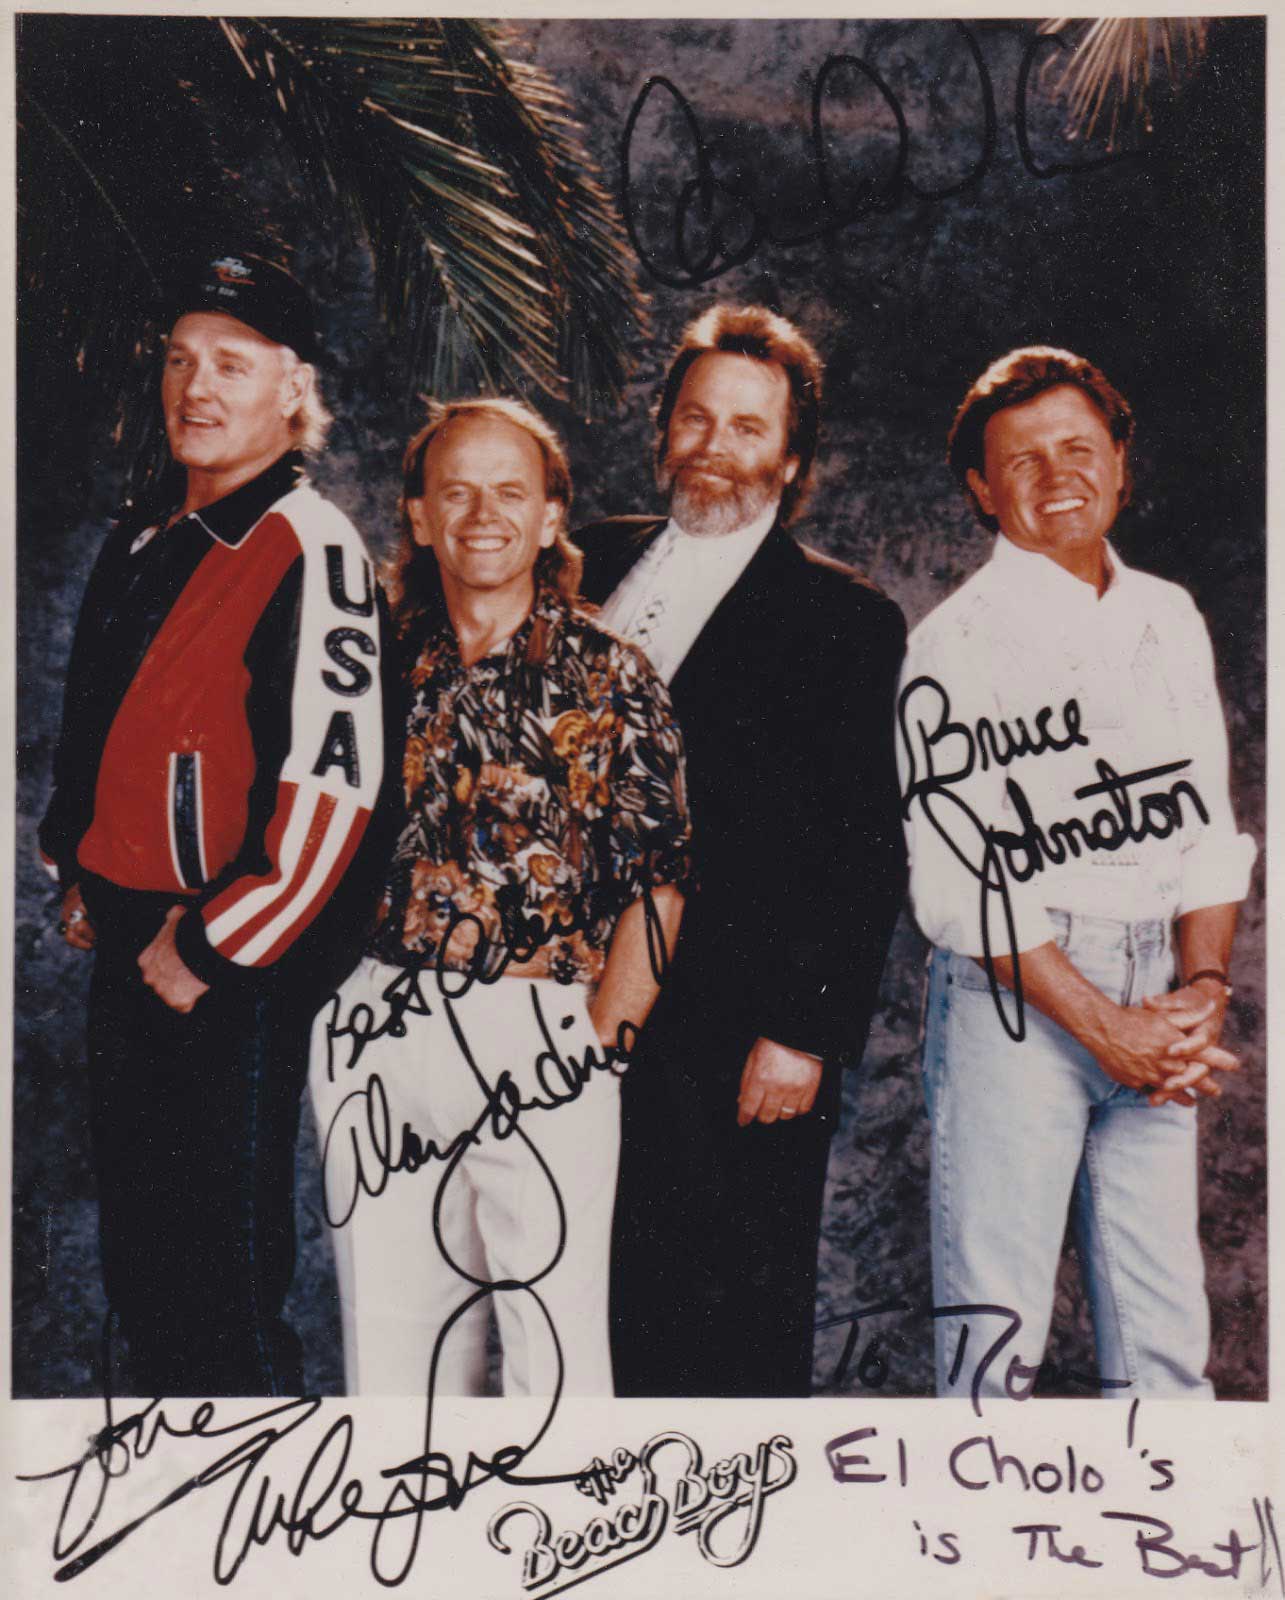 Mike Love (of Beach Boys fame)